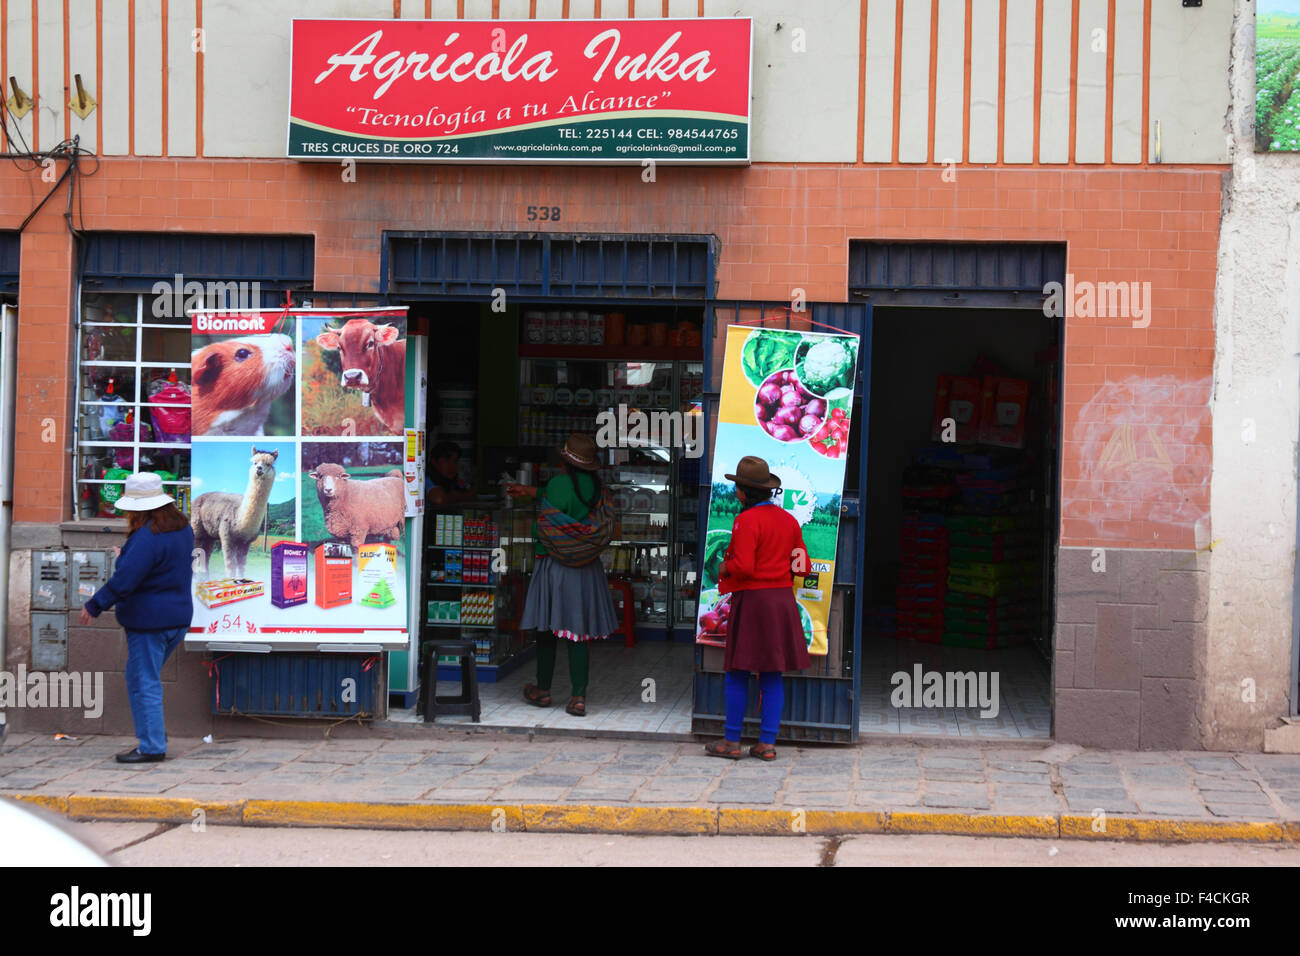 Quechua women entering a shop selling fertilizers and agricultural products, Cusco, Peru Stock Photo